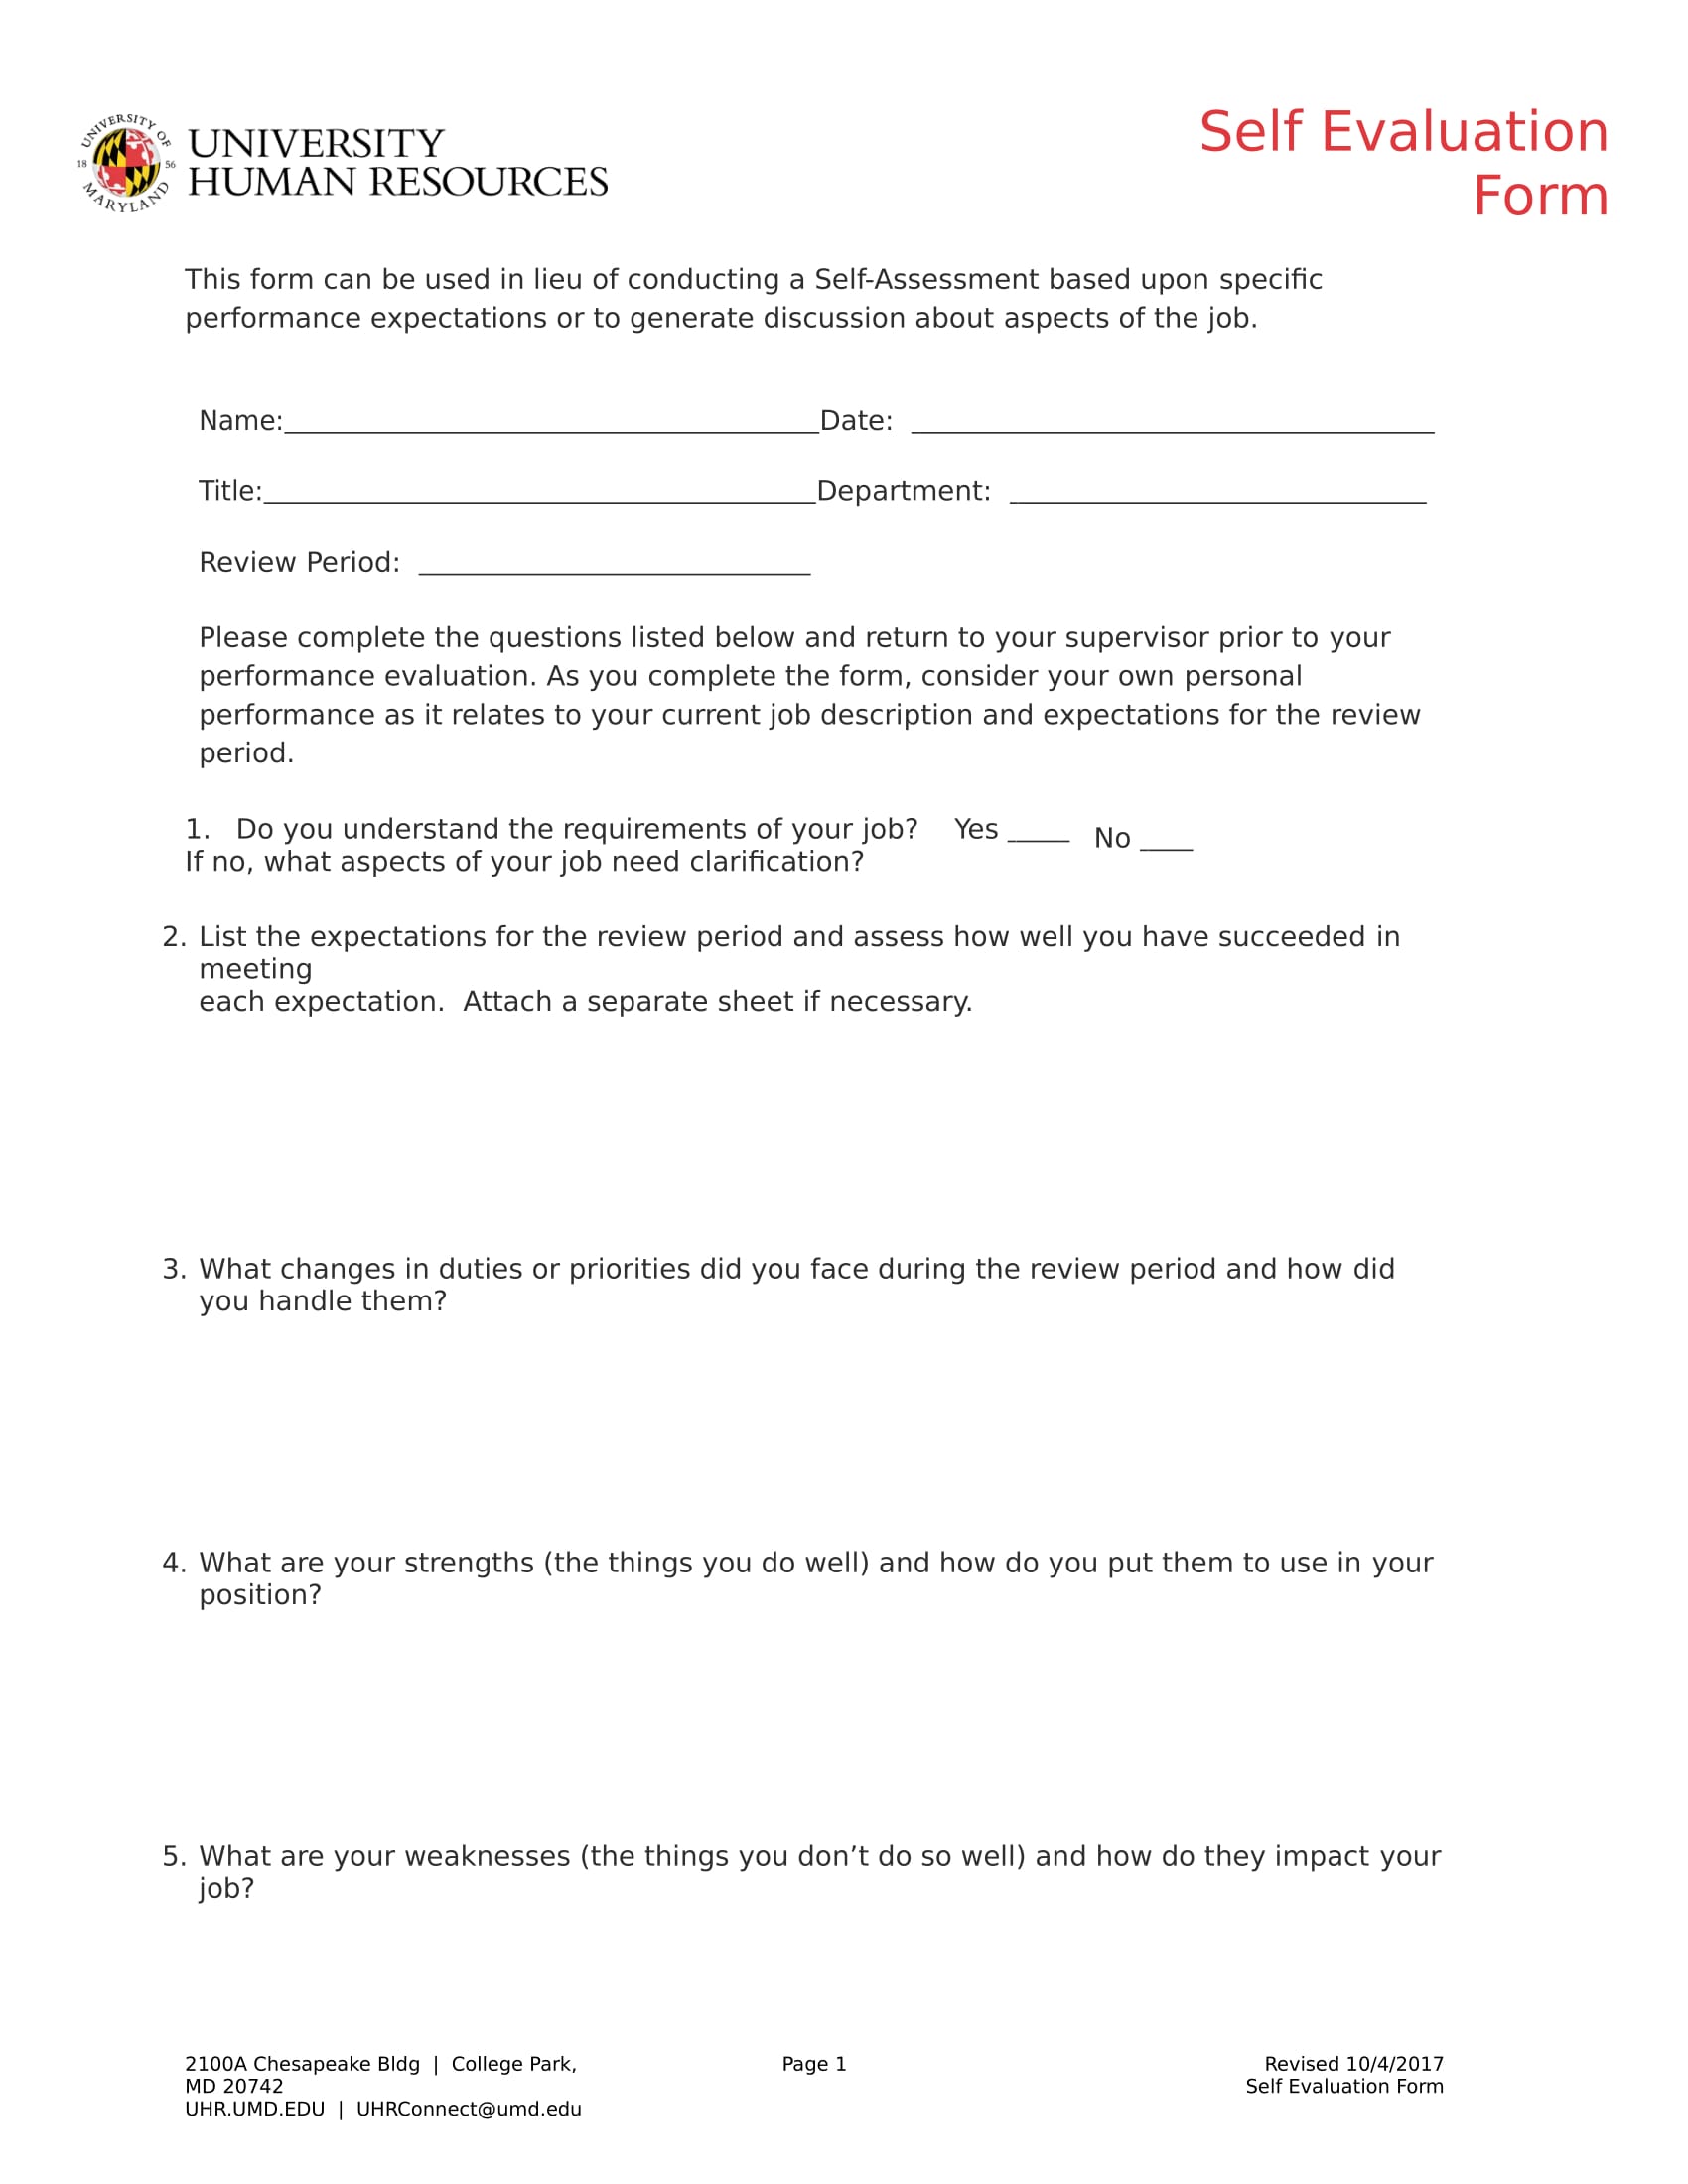 employee self evaluation form in doc 1